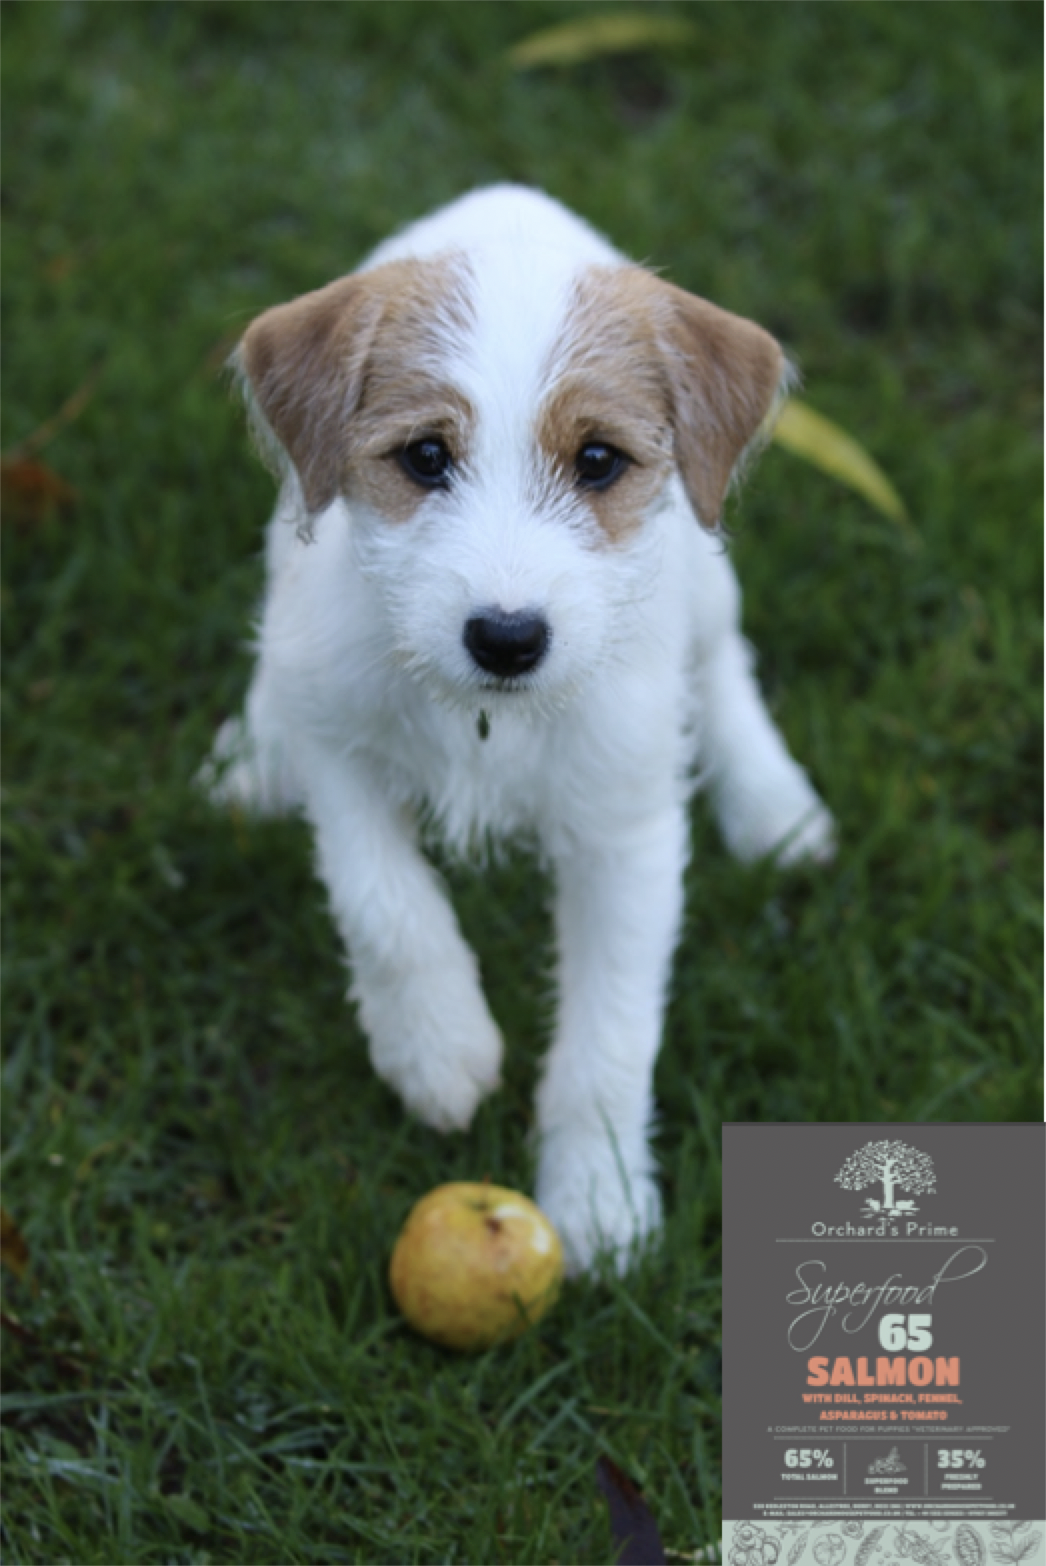 Three Reasons why Collagen is so Important for Puppies